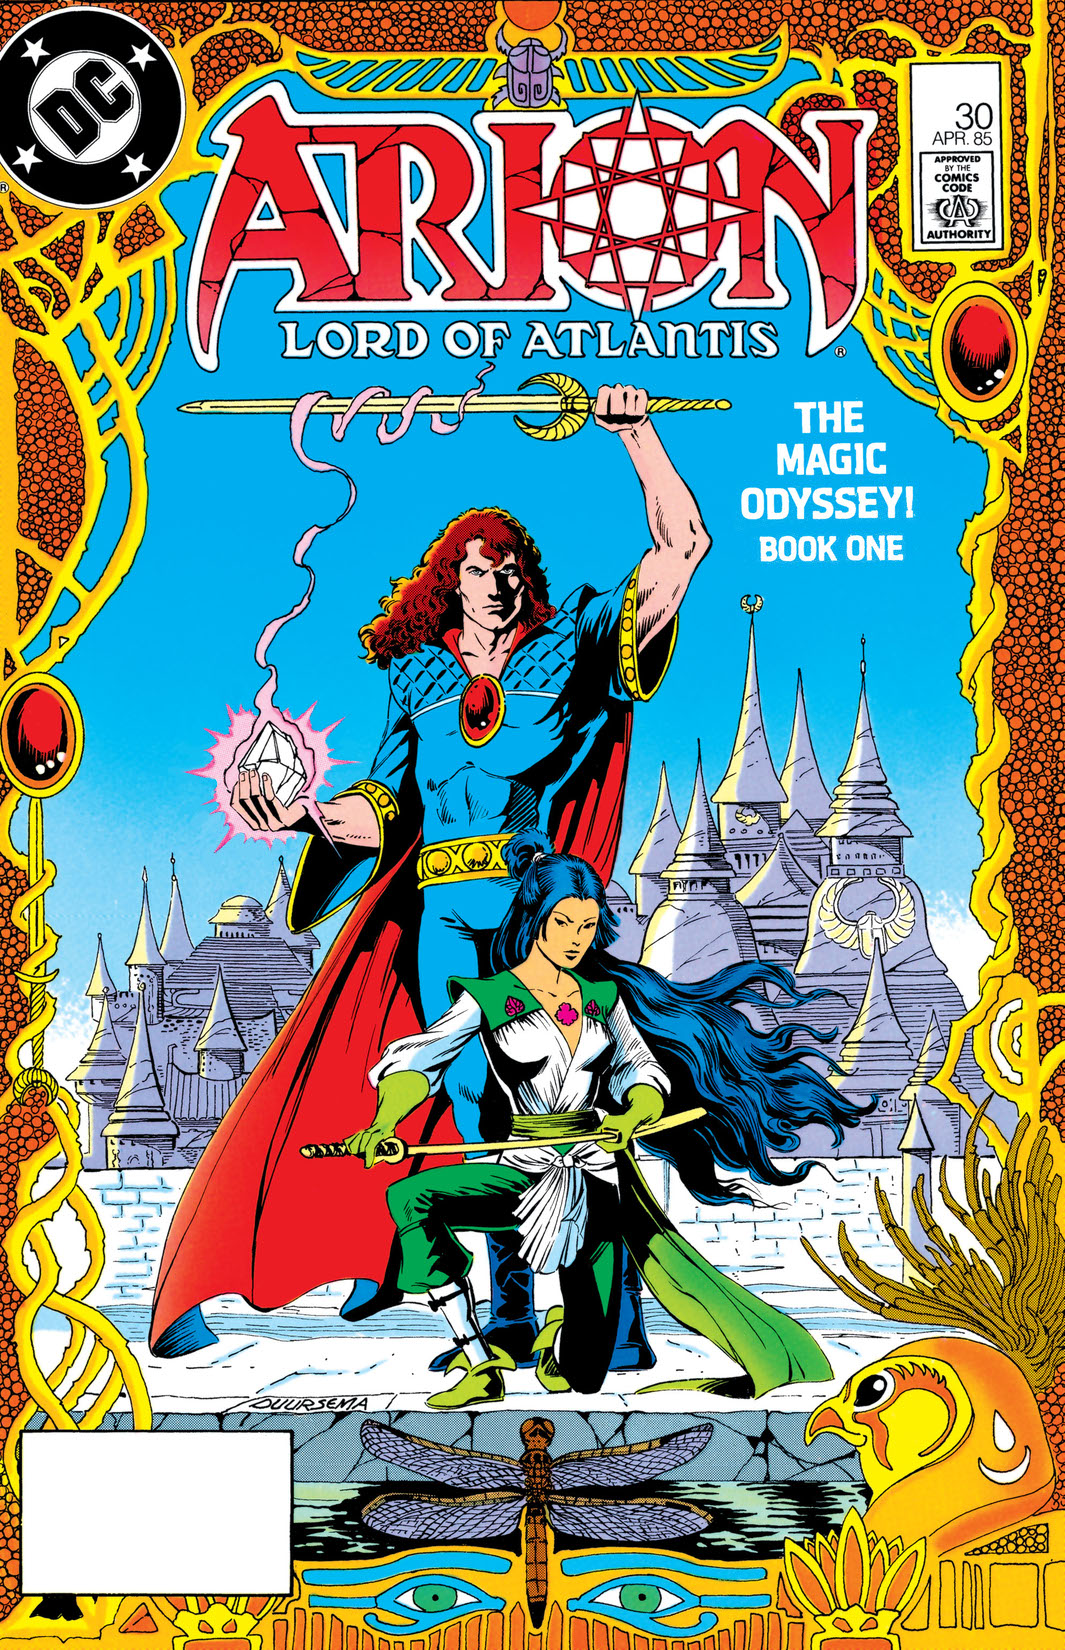 Arion, Lord of Atlantis #30 preview images